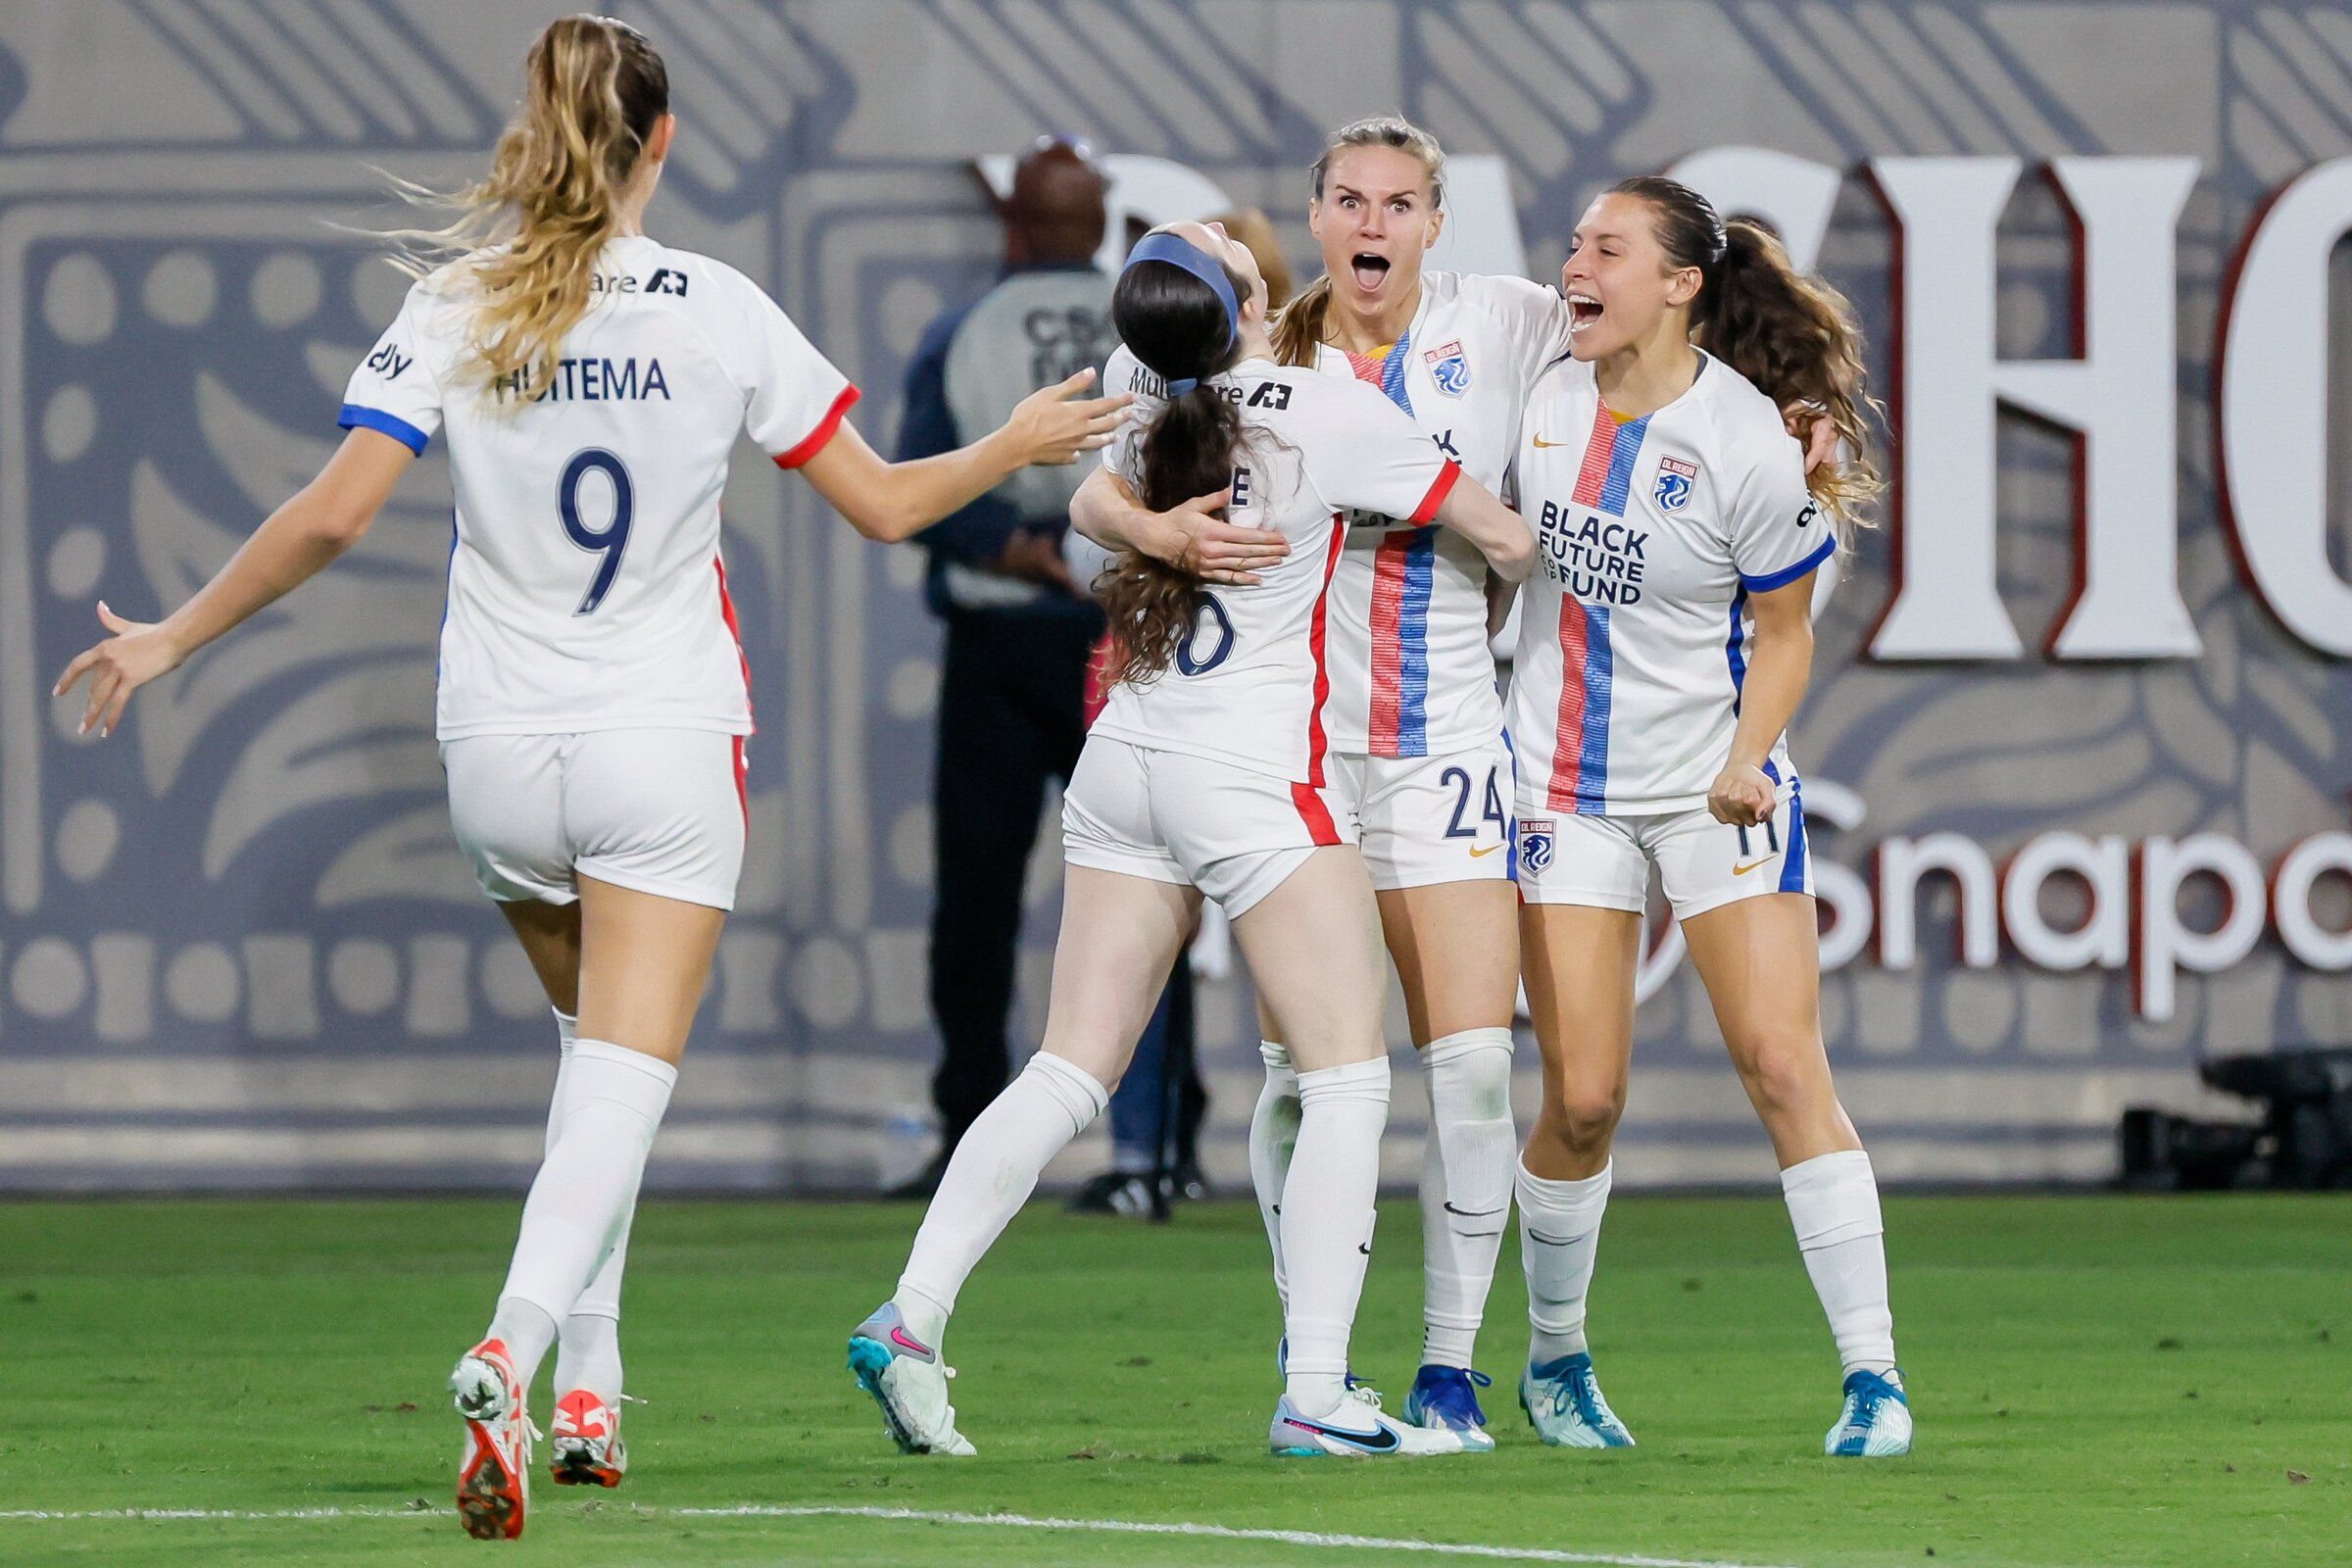 How to Watch NWSL Streaming Live Today - September 16